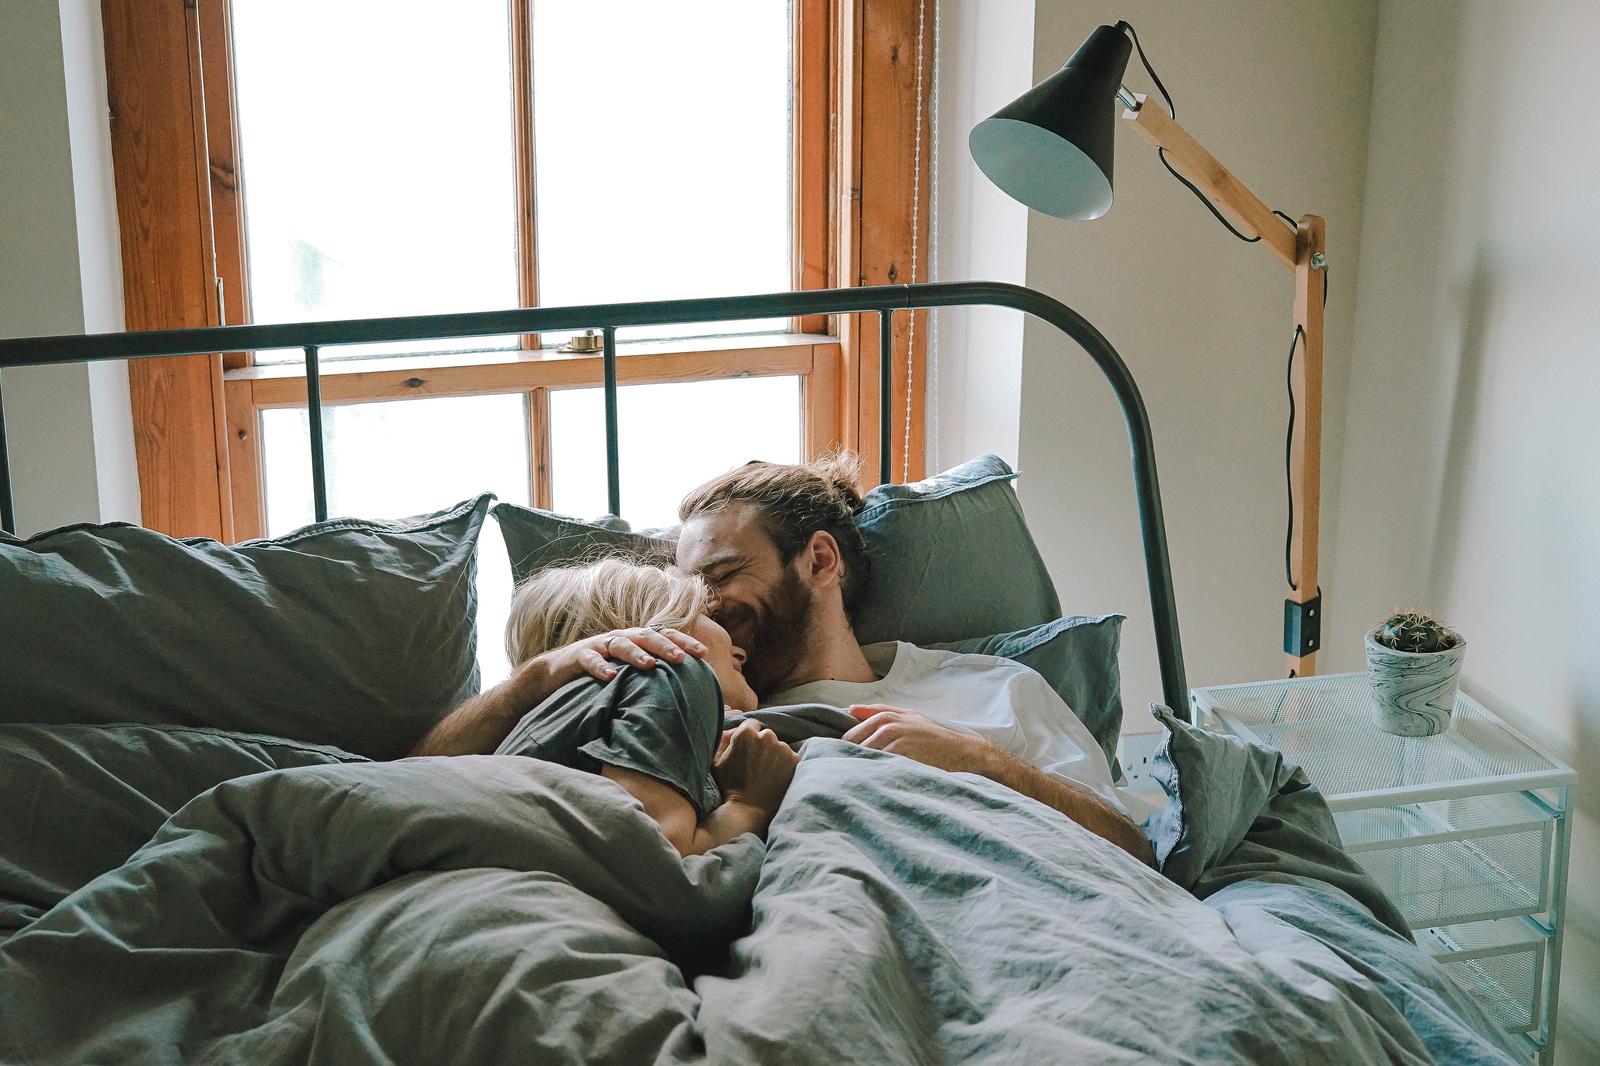 This Quiz Will Reveal Whether or Not You Fall in 💖 Love Easily Couple in bed